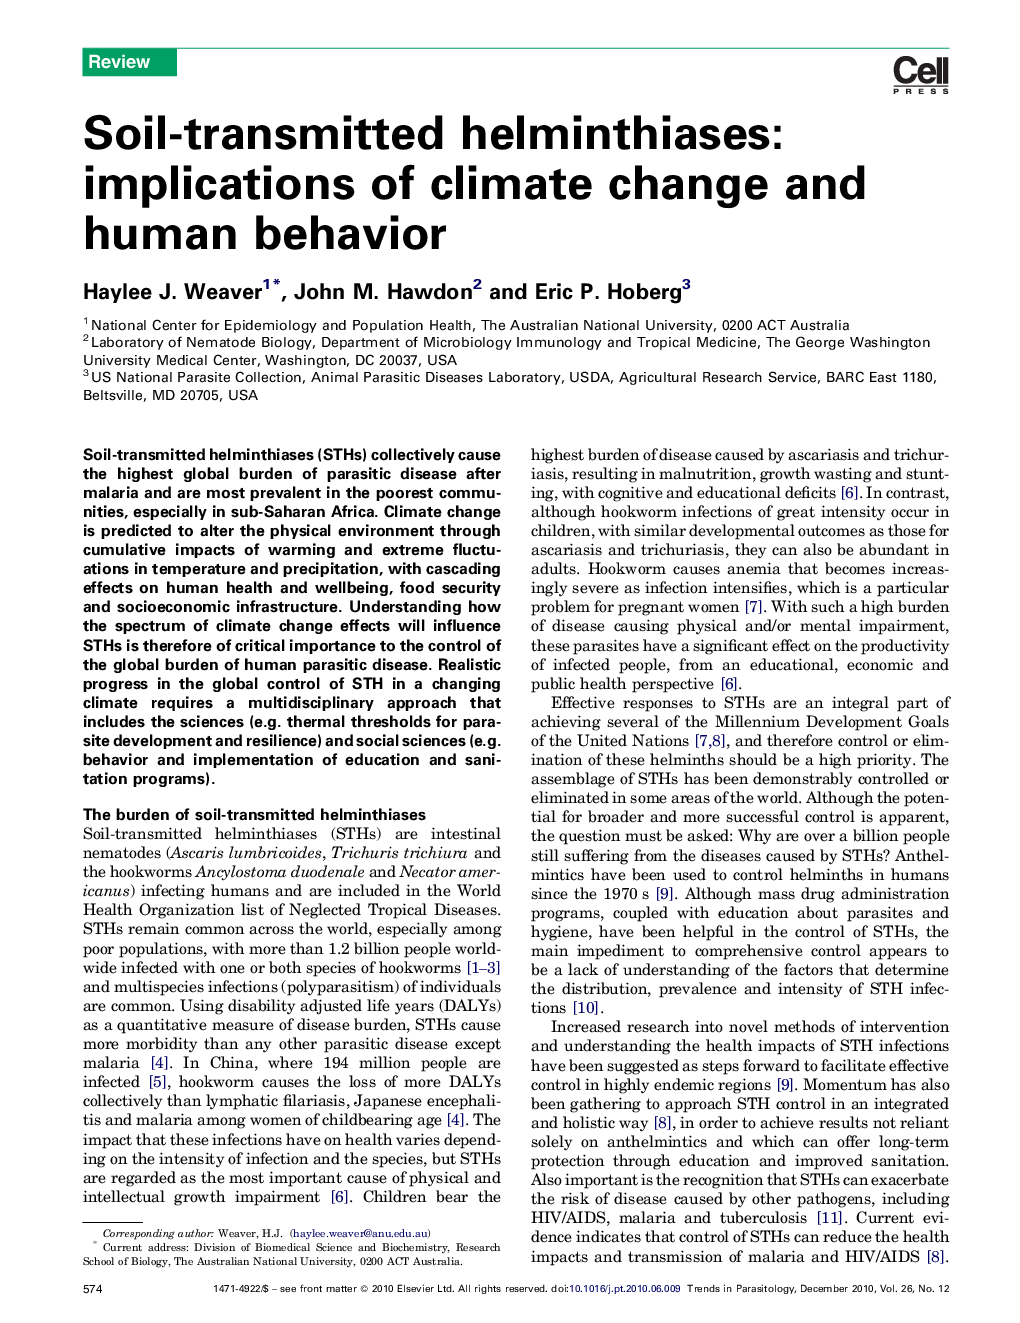 Soil-transmitted helminthiases: implications of climate change and human behavior